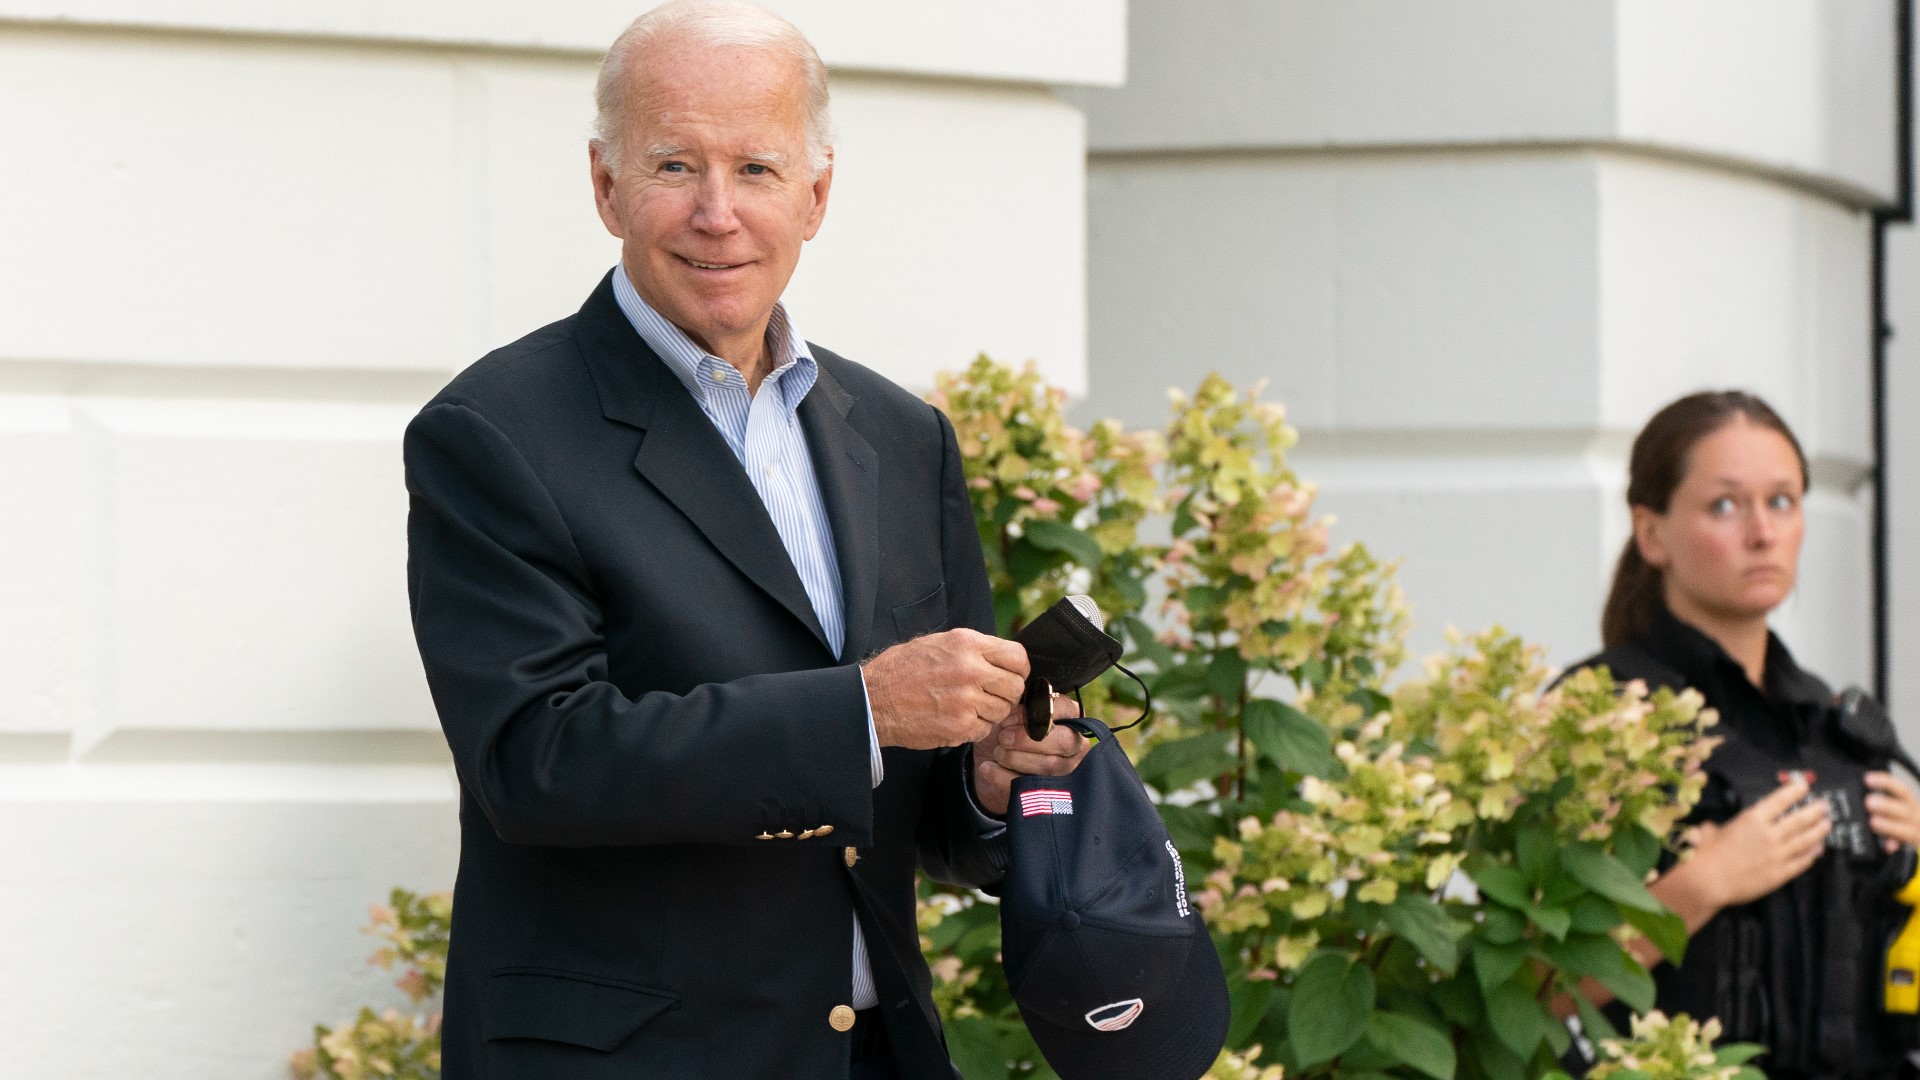 The Bidens are scheduled to visit Kentucky on Monday to view flood damage and meet with families.